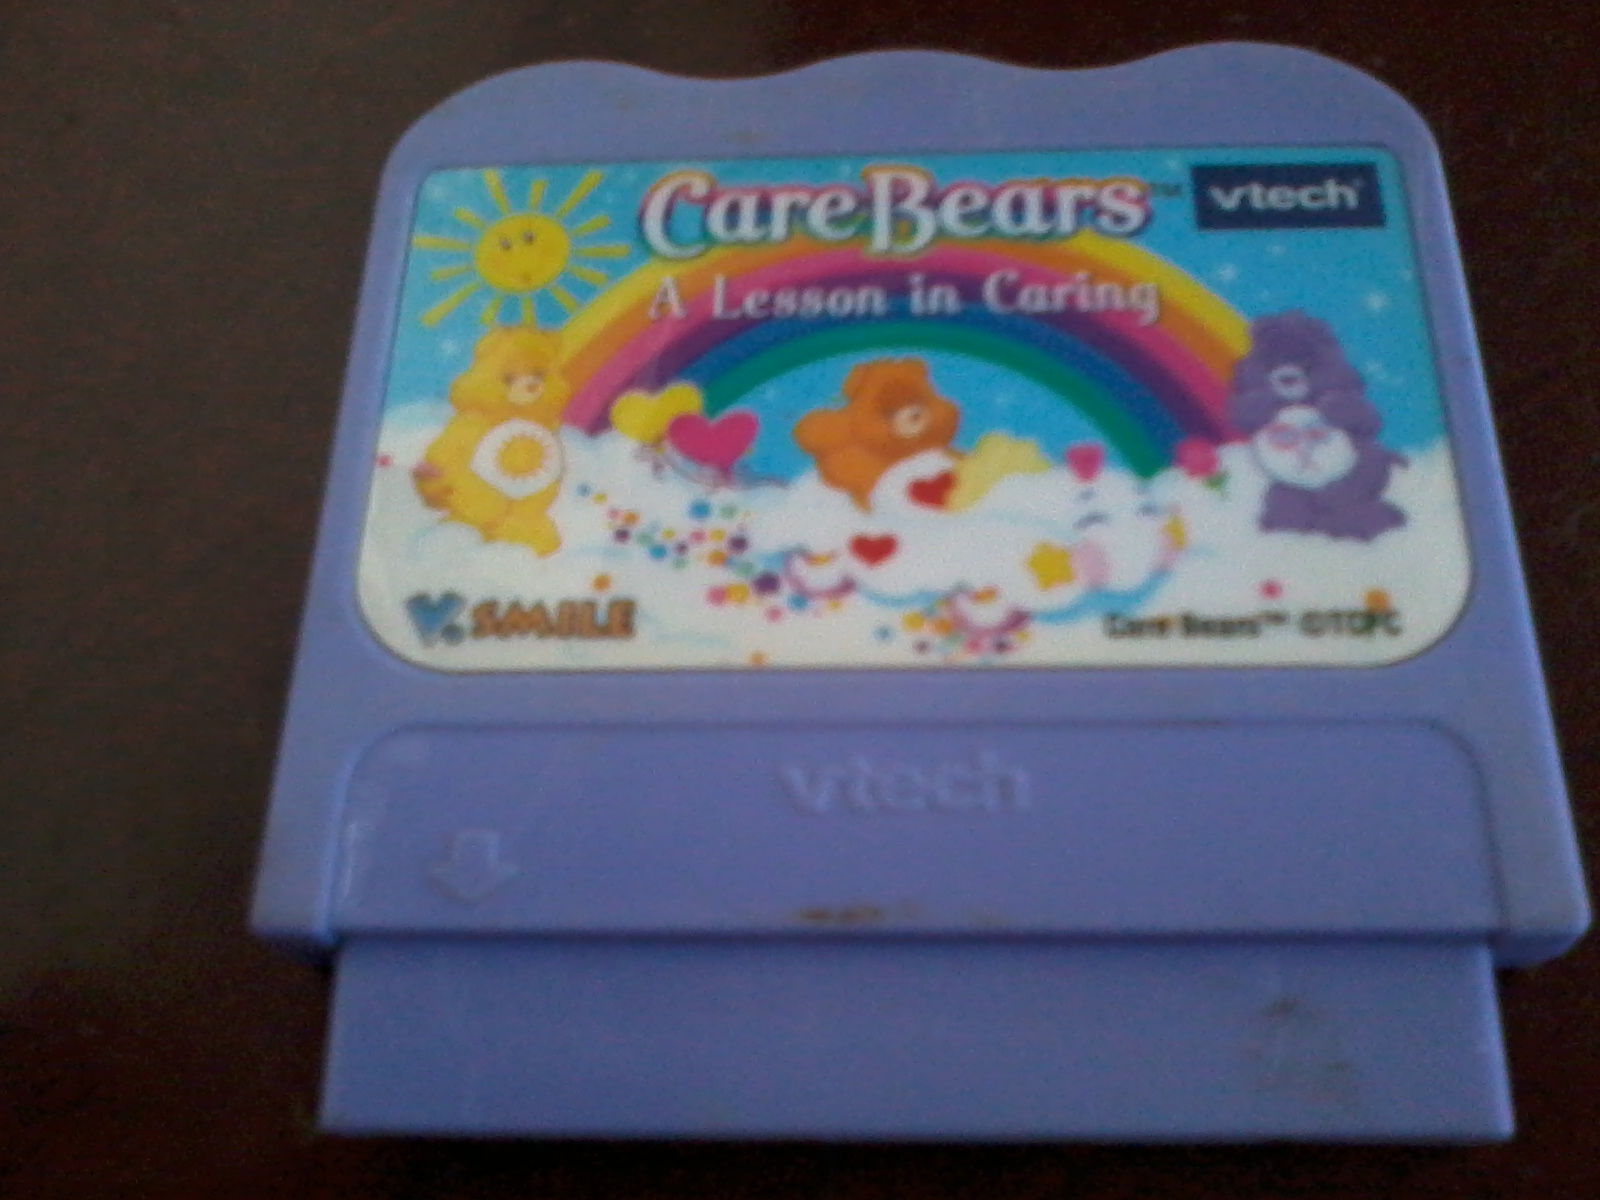 V-Tech V-Smile Care Bears A Lesson In Caring Game Cartridge